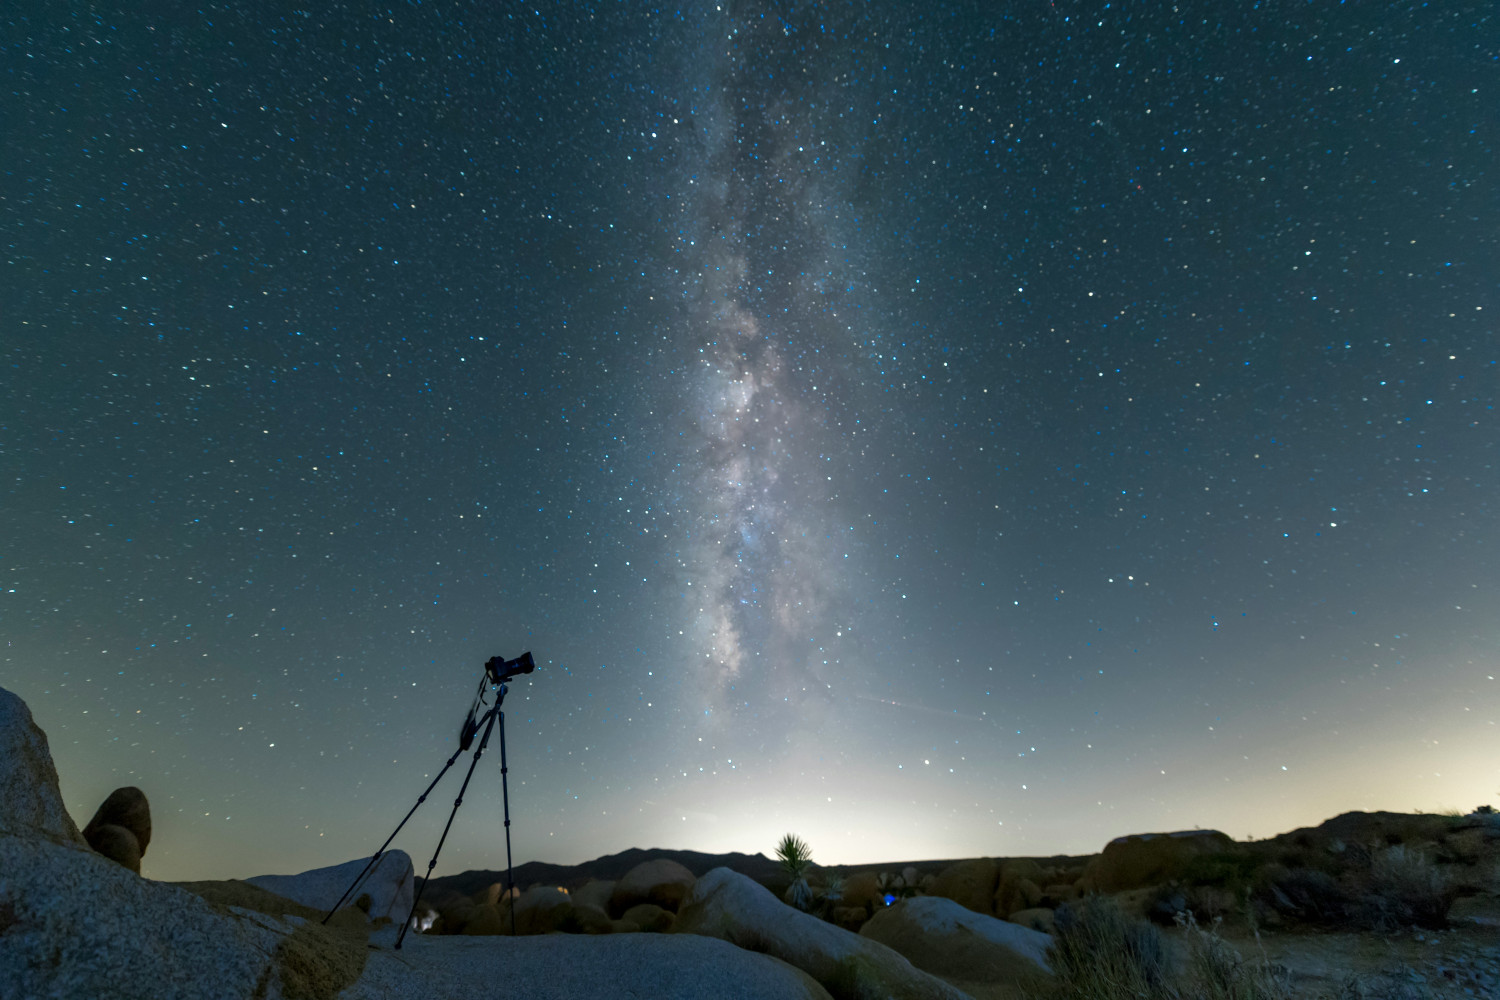 Astrophotography Basics for Beginners